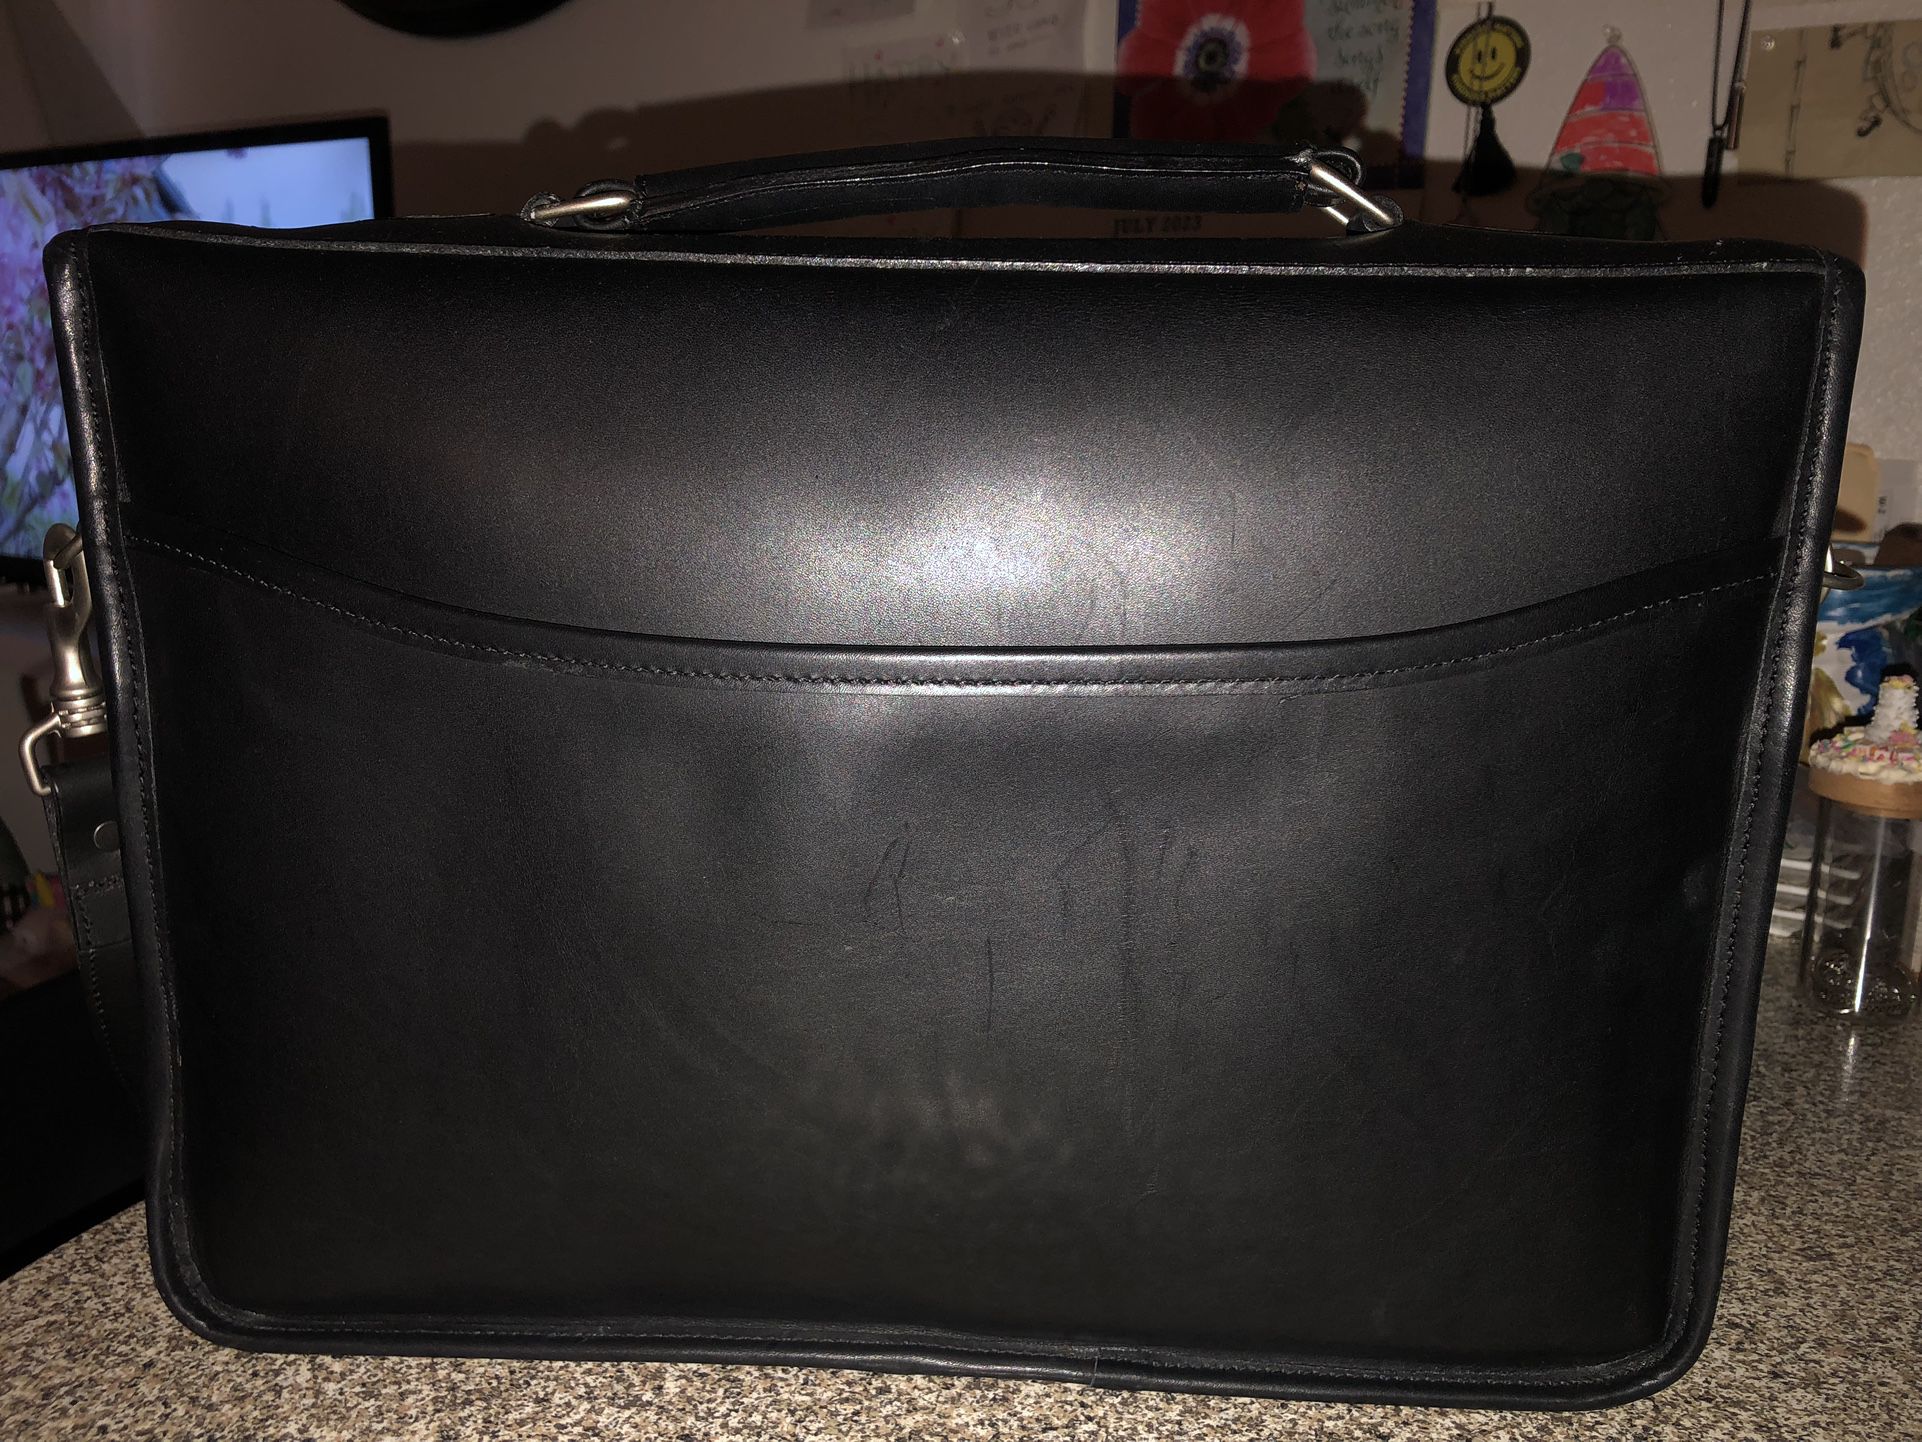 Franklin Covey Brown leather Briefcase organizer bag for Sale in New York,  NY - OfferUp